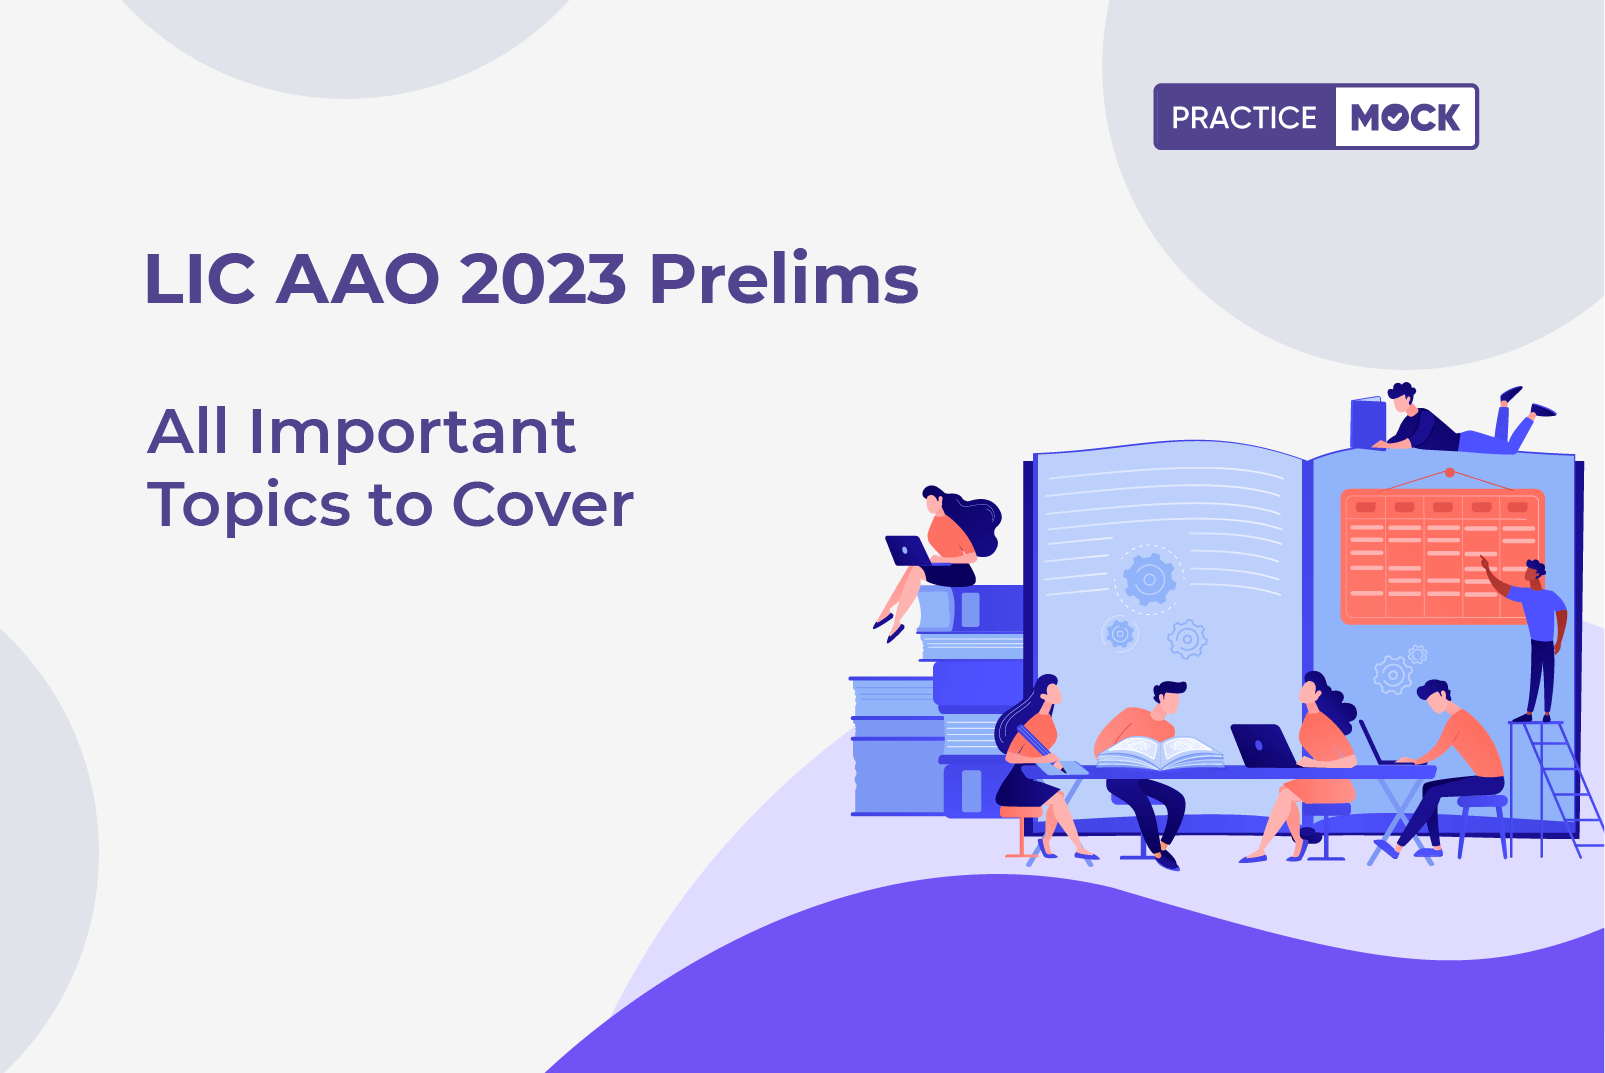 LIC AAO 2023 Prelims All Important Topics Covered